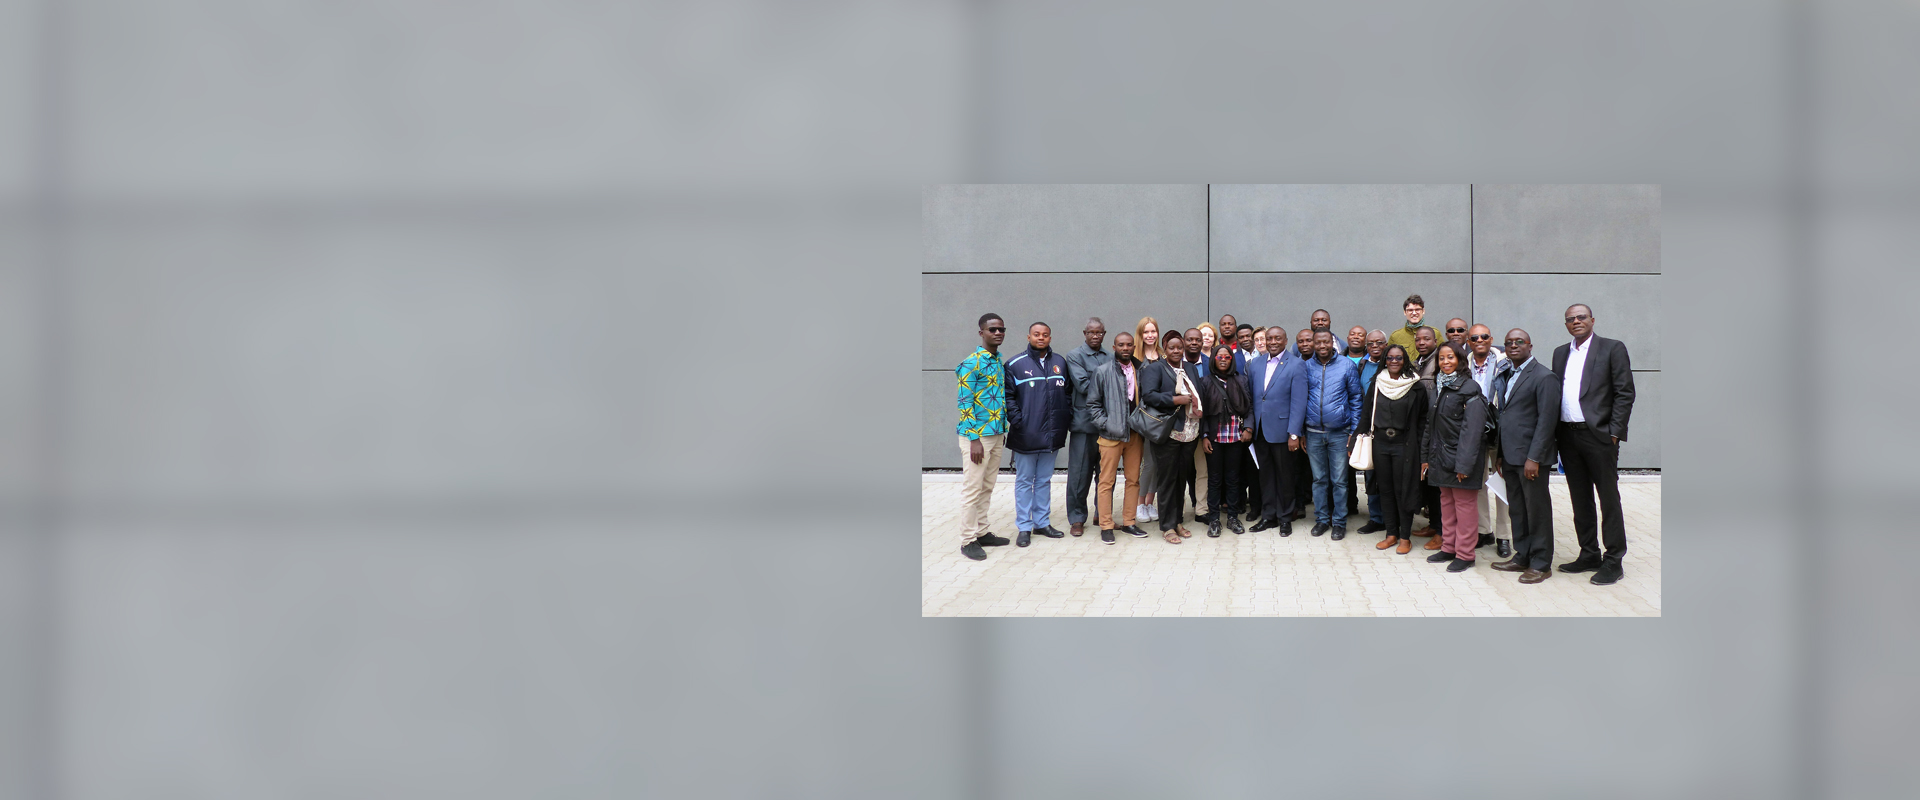 Specialist seminar for construction professionals from Ghana